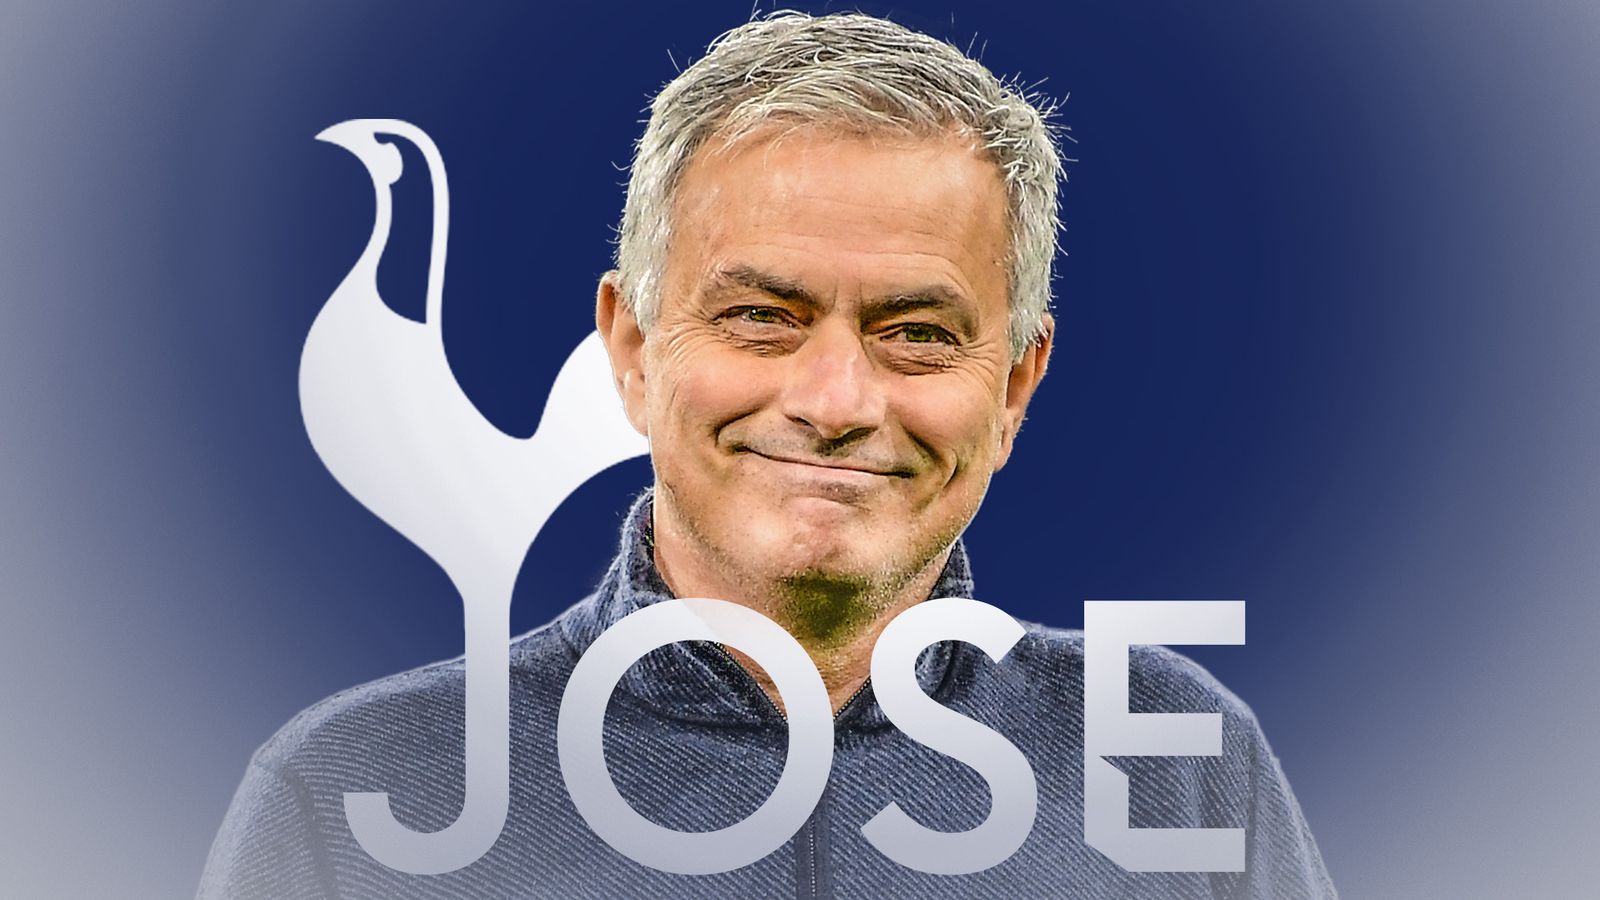 jose-mourinho-on-top-with-tottenham-how-his-methods-and-demands-of-this-season-match-up